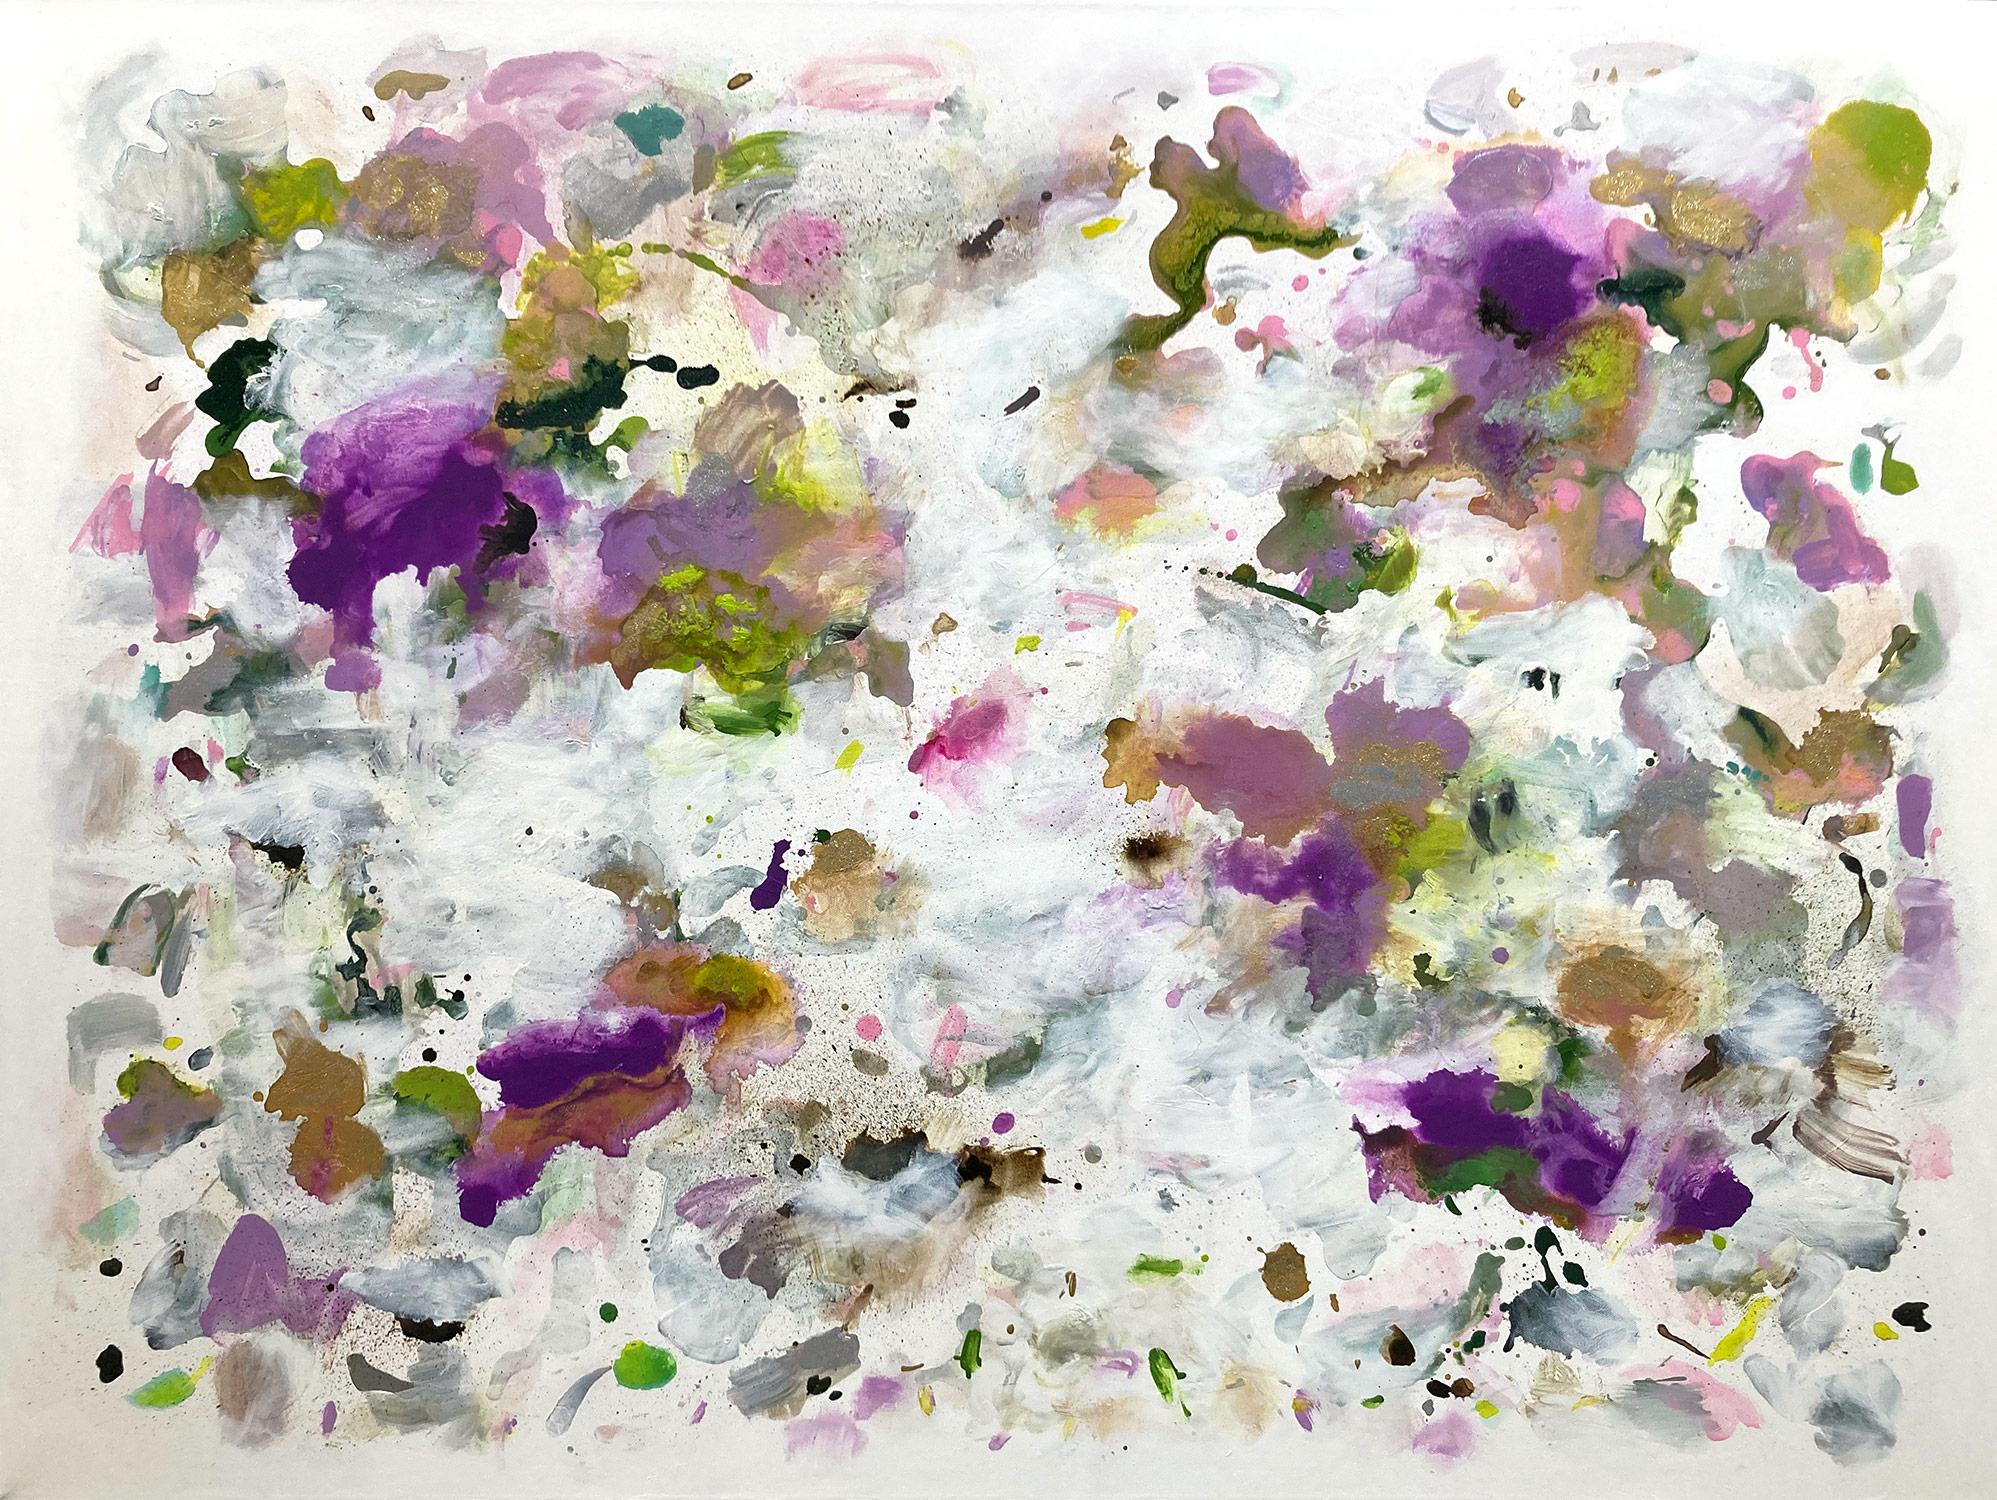 A dramatic mixed media on canvas painting with wonderful details and pops of purple, green and light lavender. We are enamored by the stark contrast, as the shape of the paint takes on unique and stunning forms. A wonderfully colorful and strong